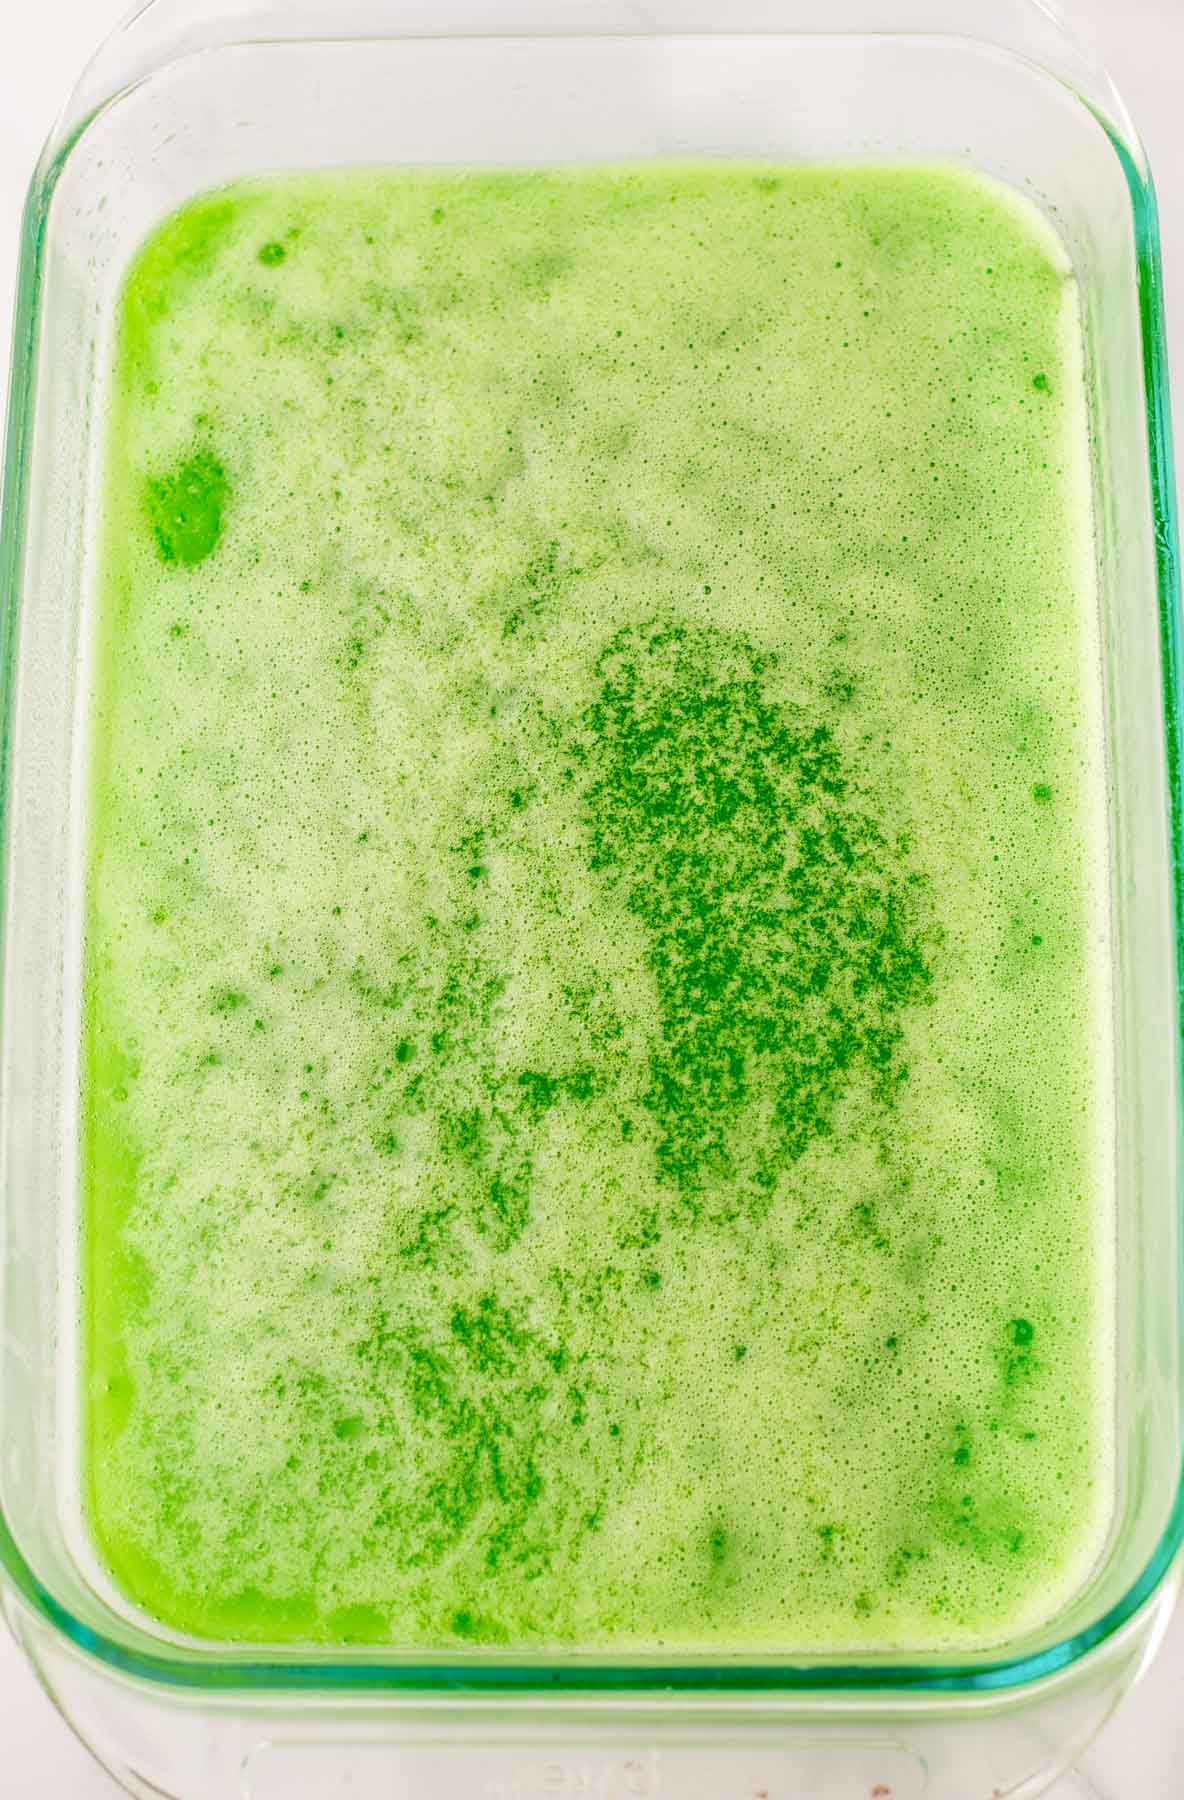 A bowl of green liquid in a glass dish.